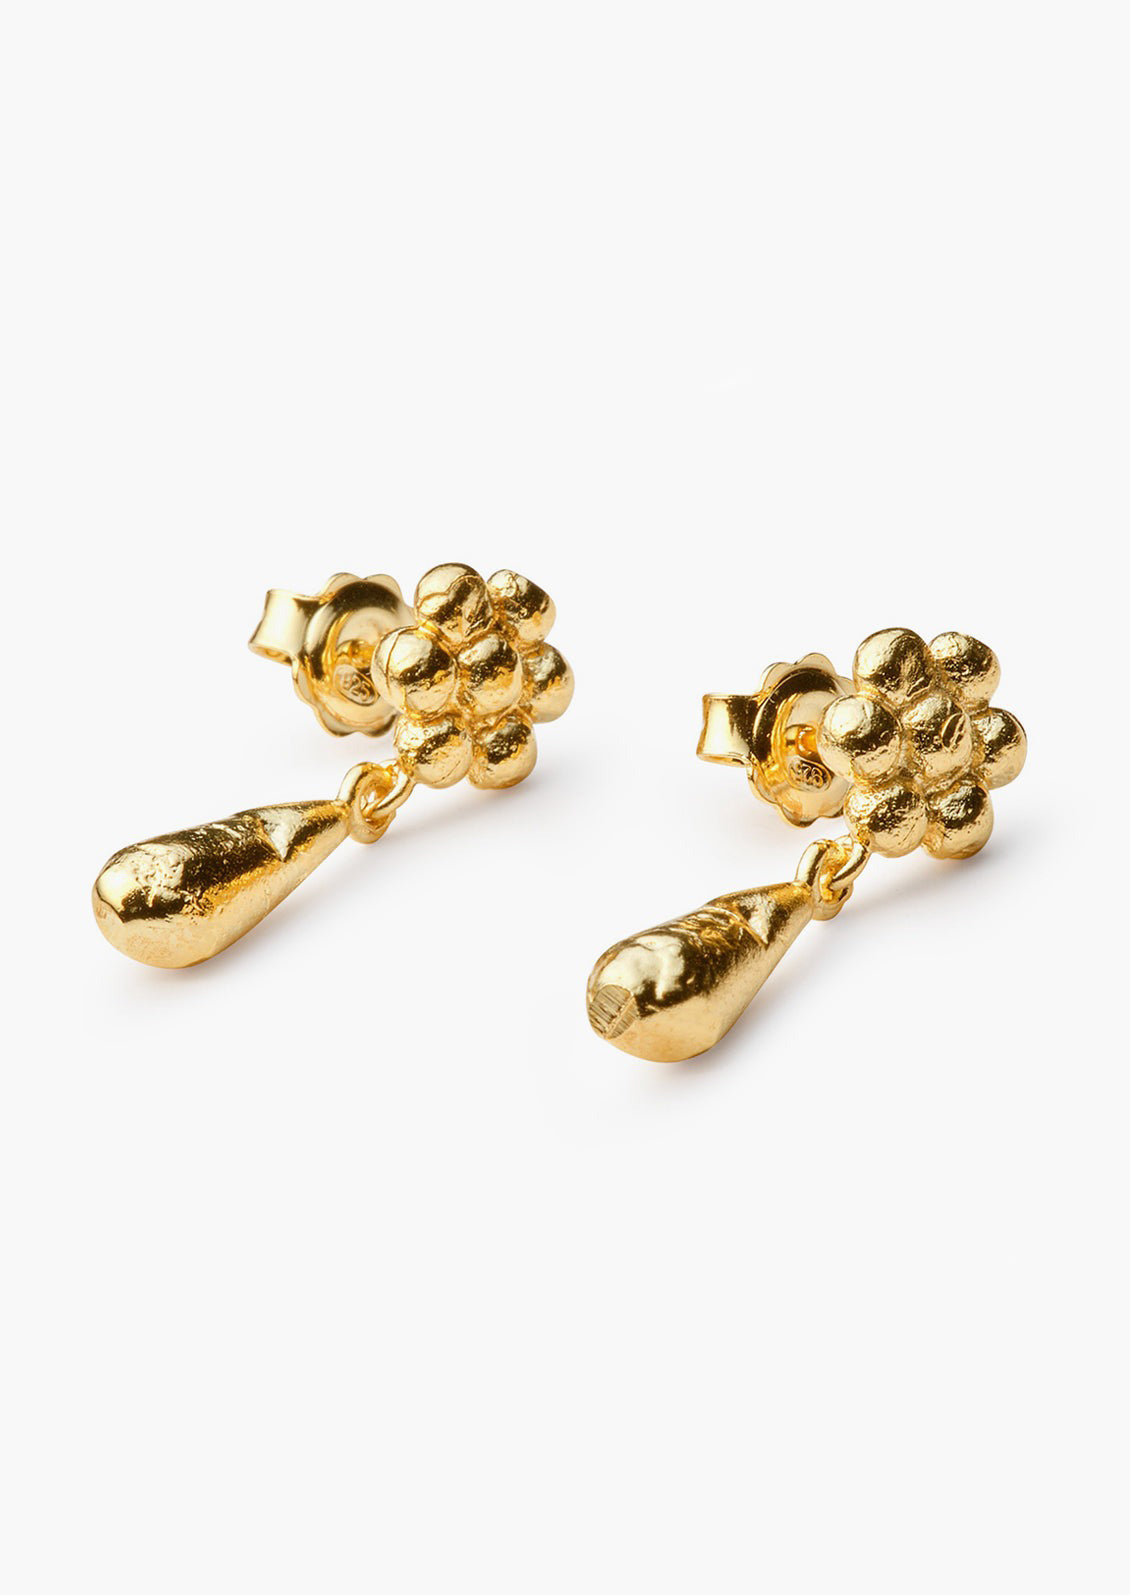 A pair of gold earrings with flower post and teardrop charm.